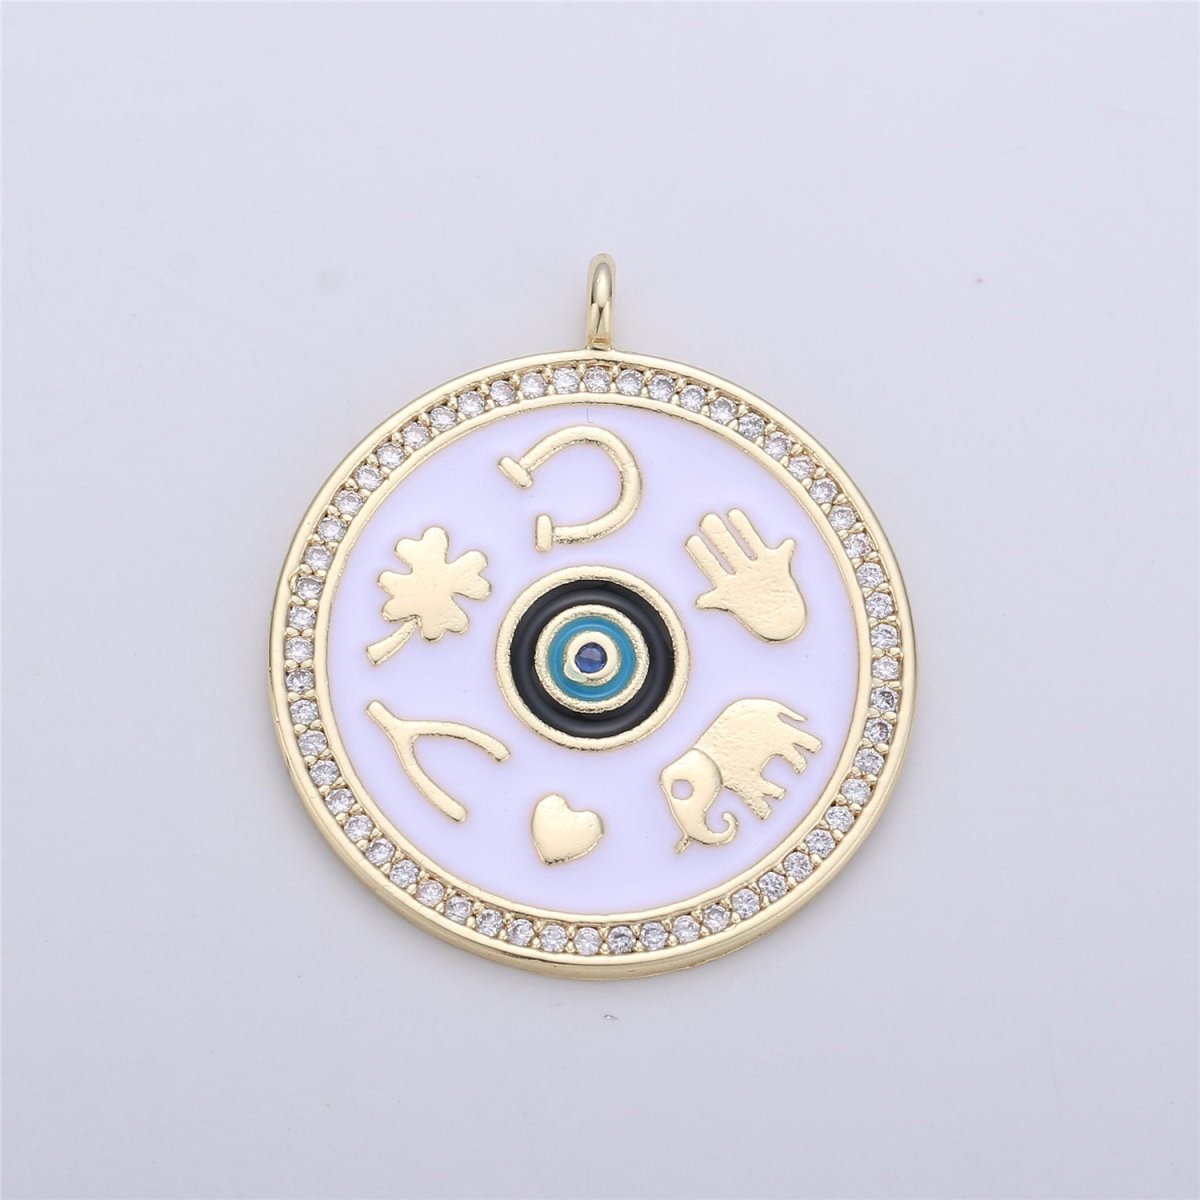 Black White Enamel Talisman Charm Necklace, Gold Filled Coin Round Pendant Lucky Medallion Pendant for Necklace Jewelry Making Supply C-688 - DLUXCA